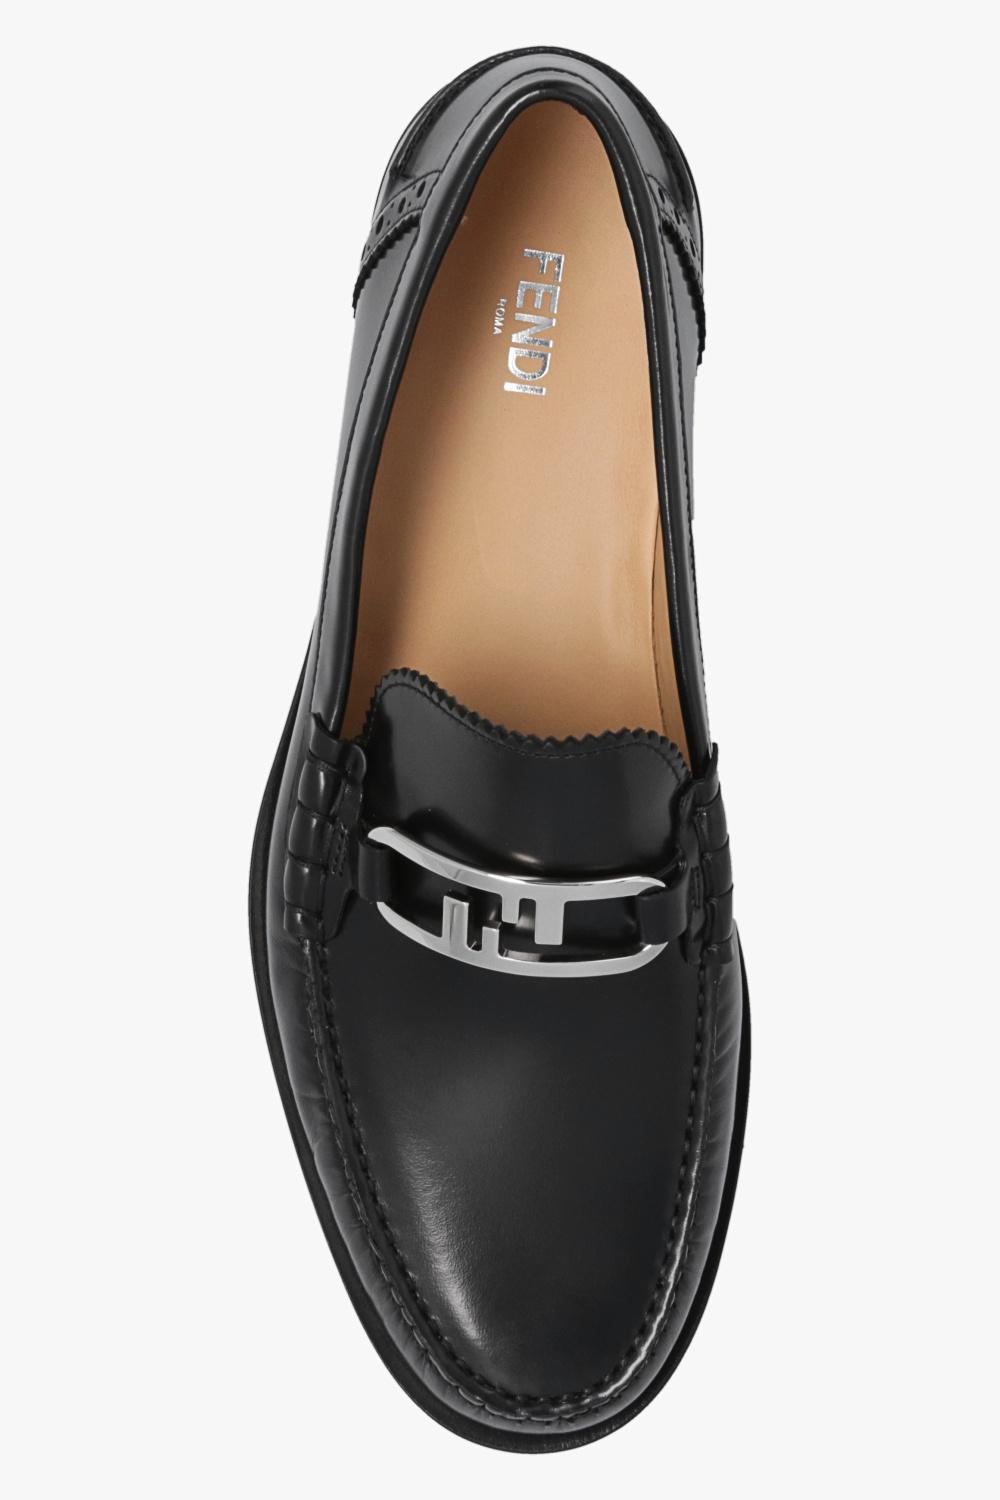 Fendi Leather Loafers in Black for Men | Lyst